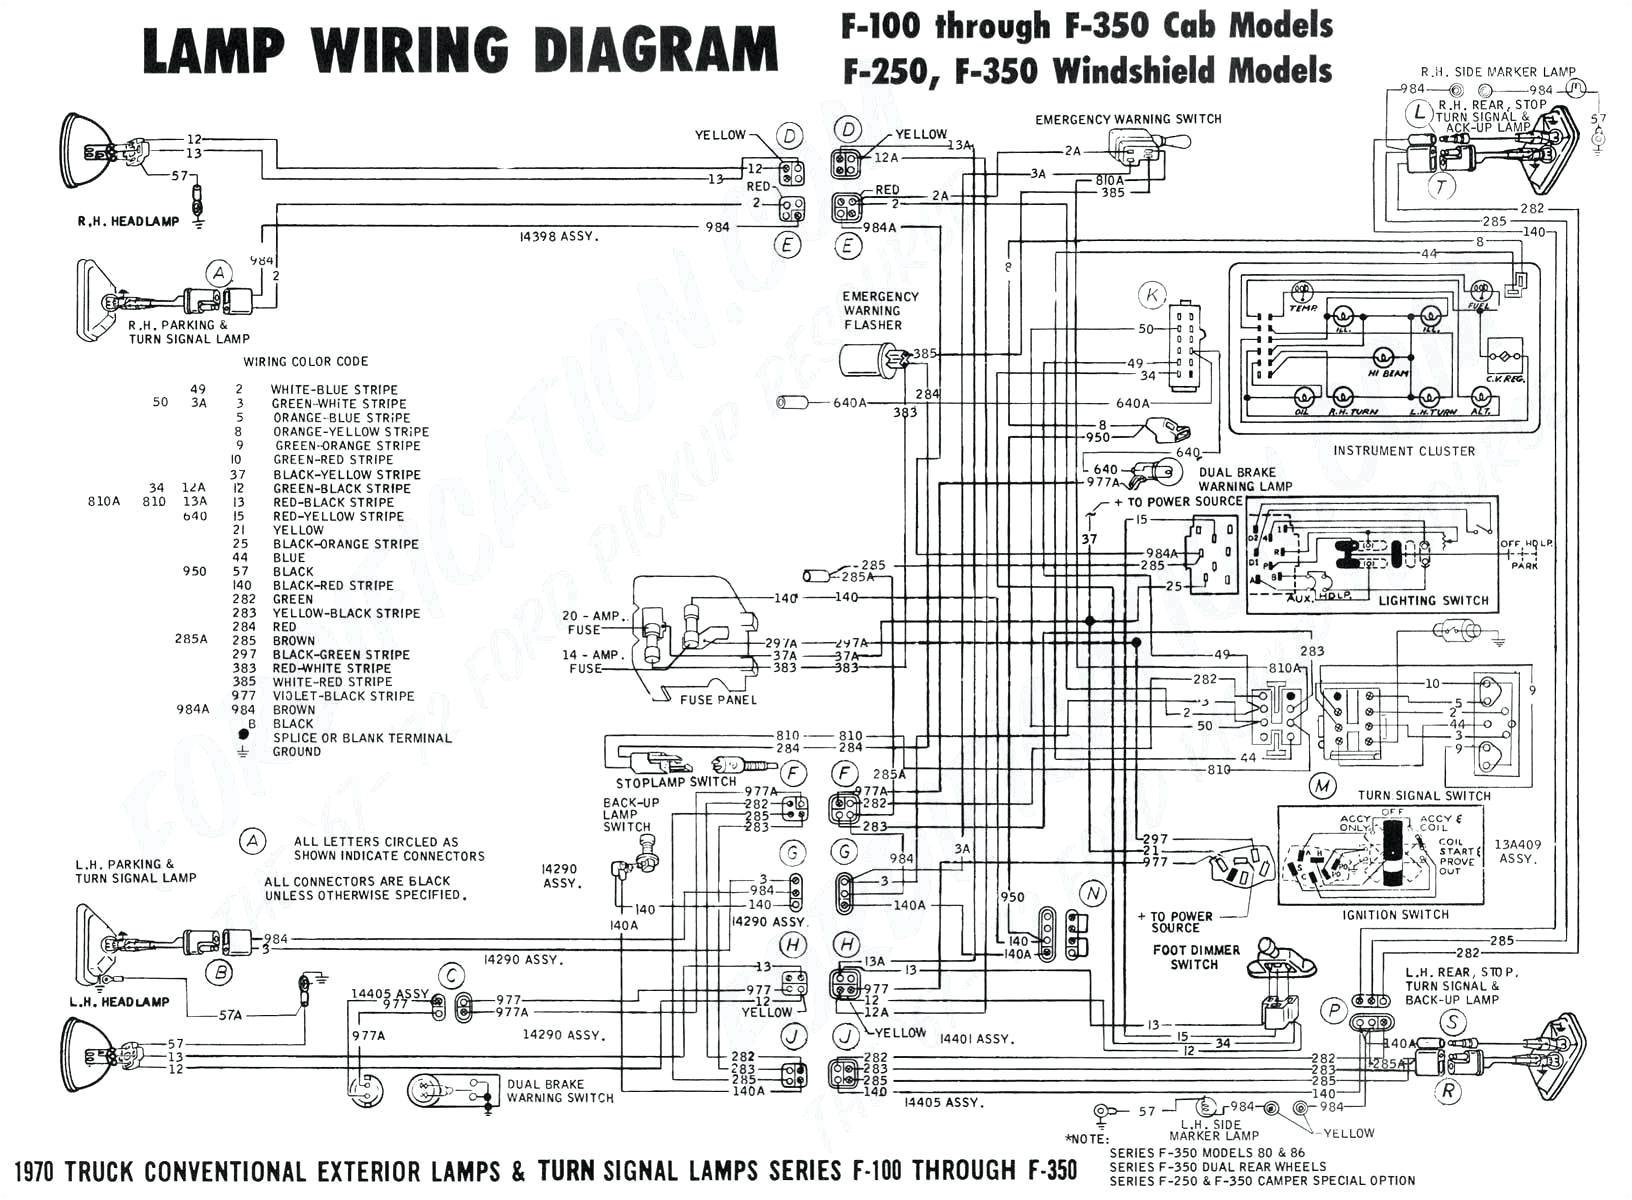 1996 honda accord ignition wiring diagram best of 2003 honda accord honda accord wiring diagram 2003